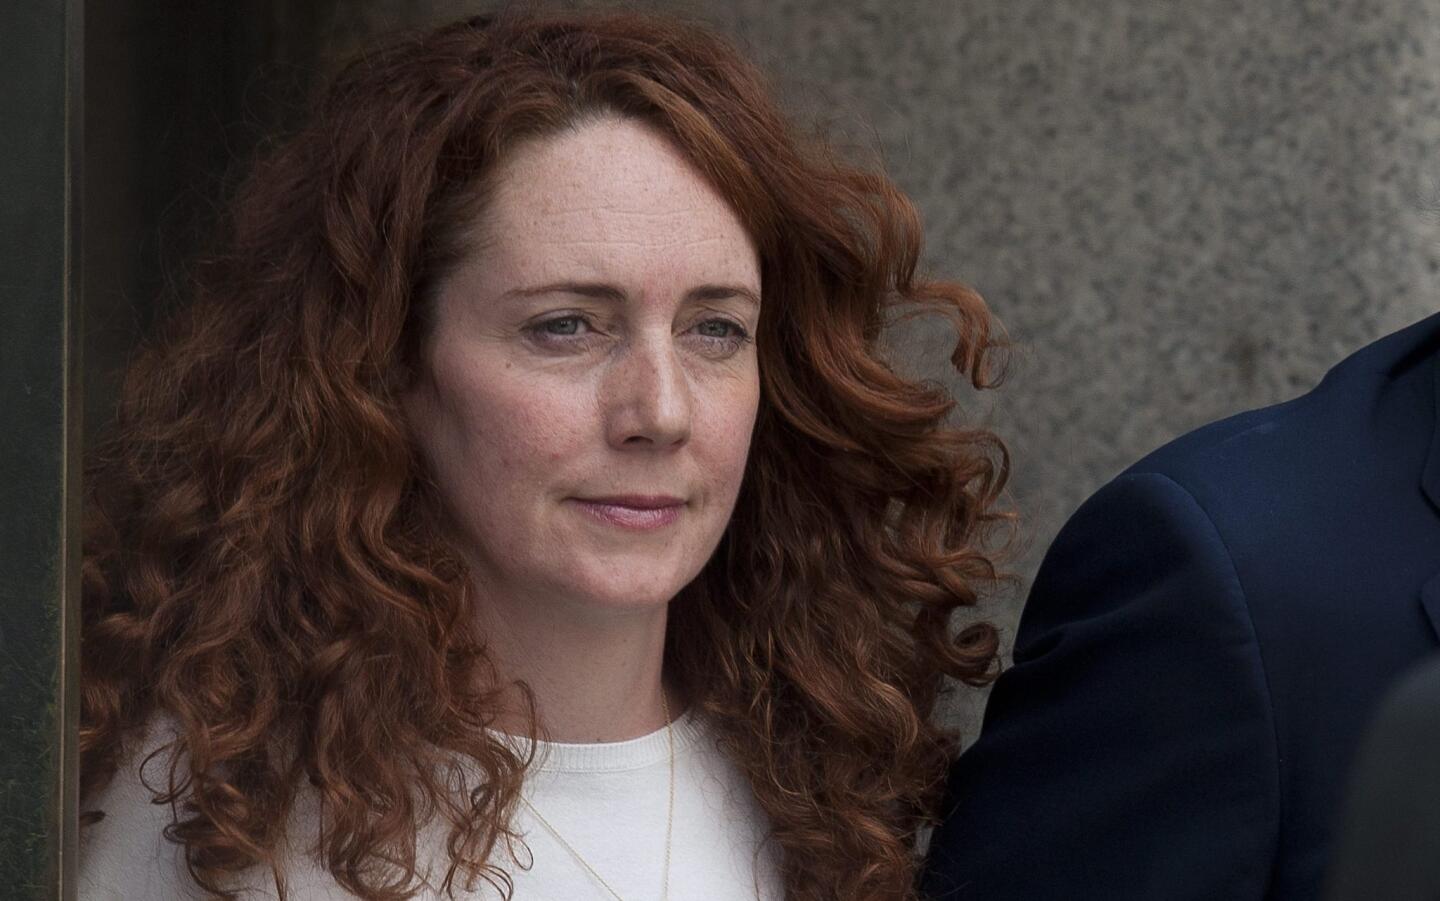 Rebekah Brooks leaves London's Old Bailey courthouse after verdicts were delivered Tuesday in a landmark phone-hacking trial.